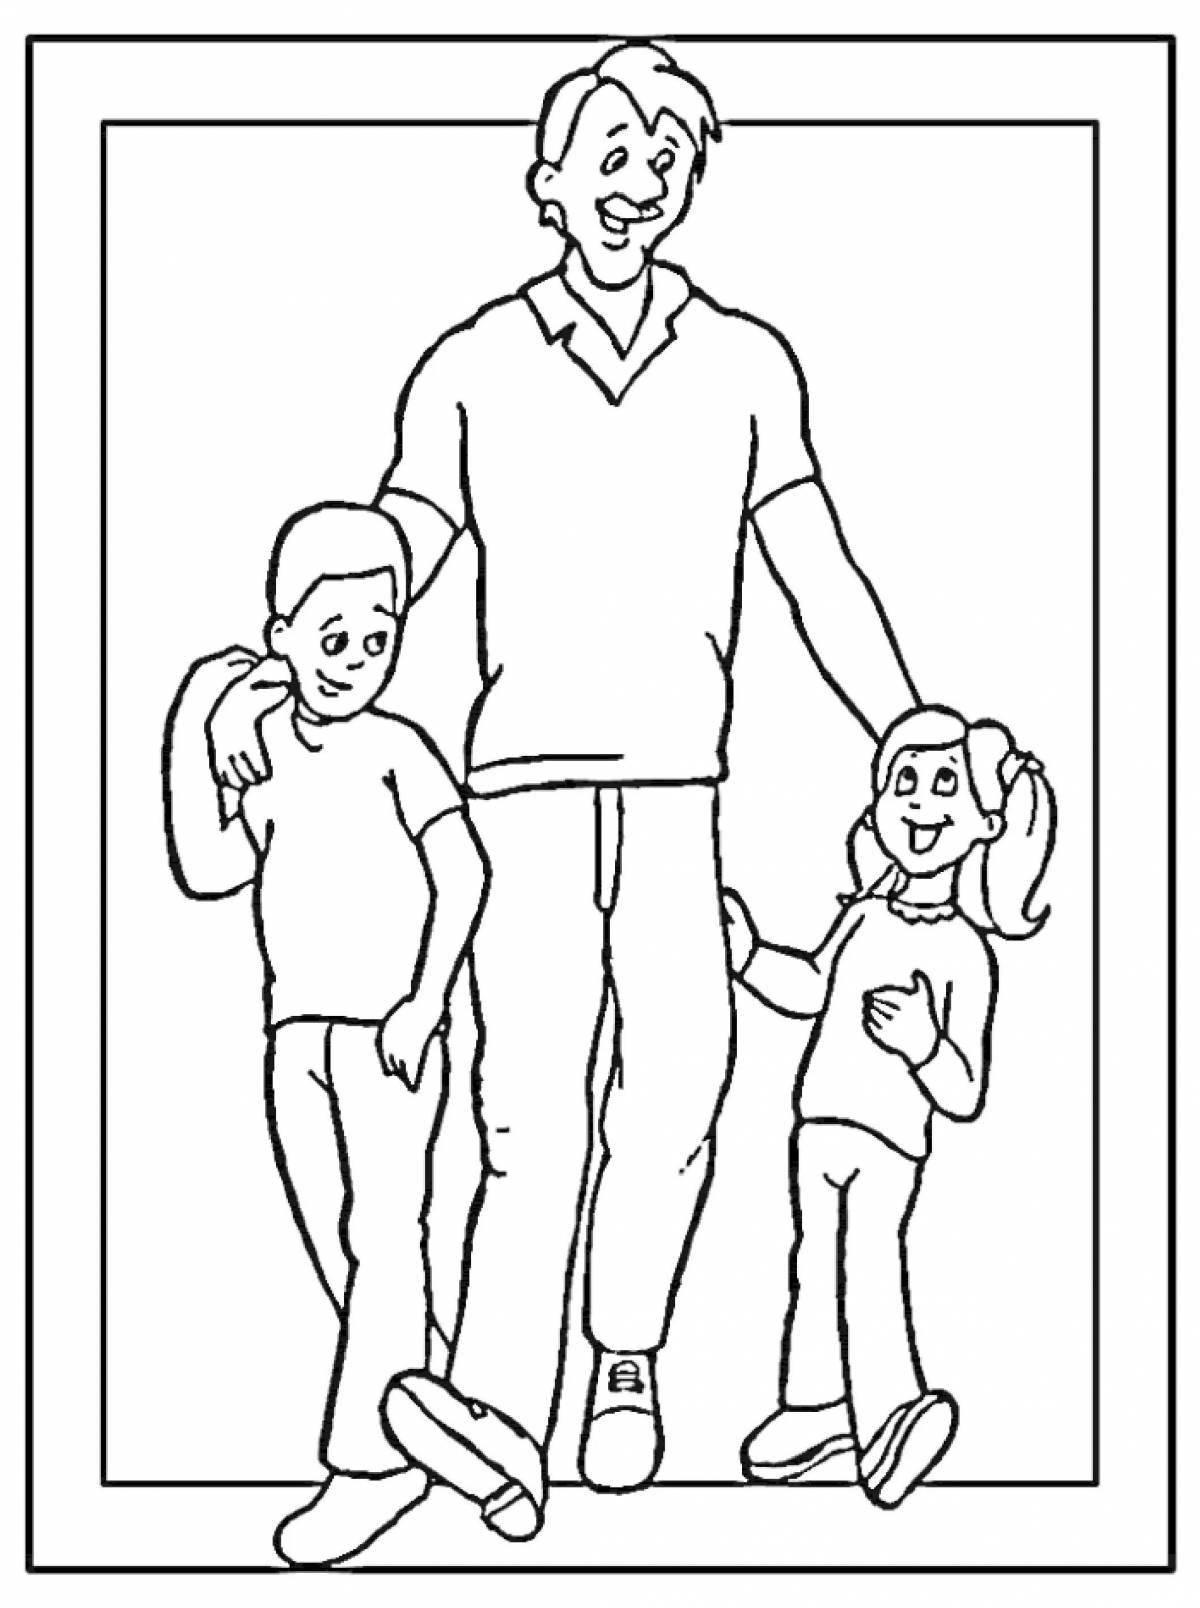 Coloring page loving dad and daughter